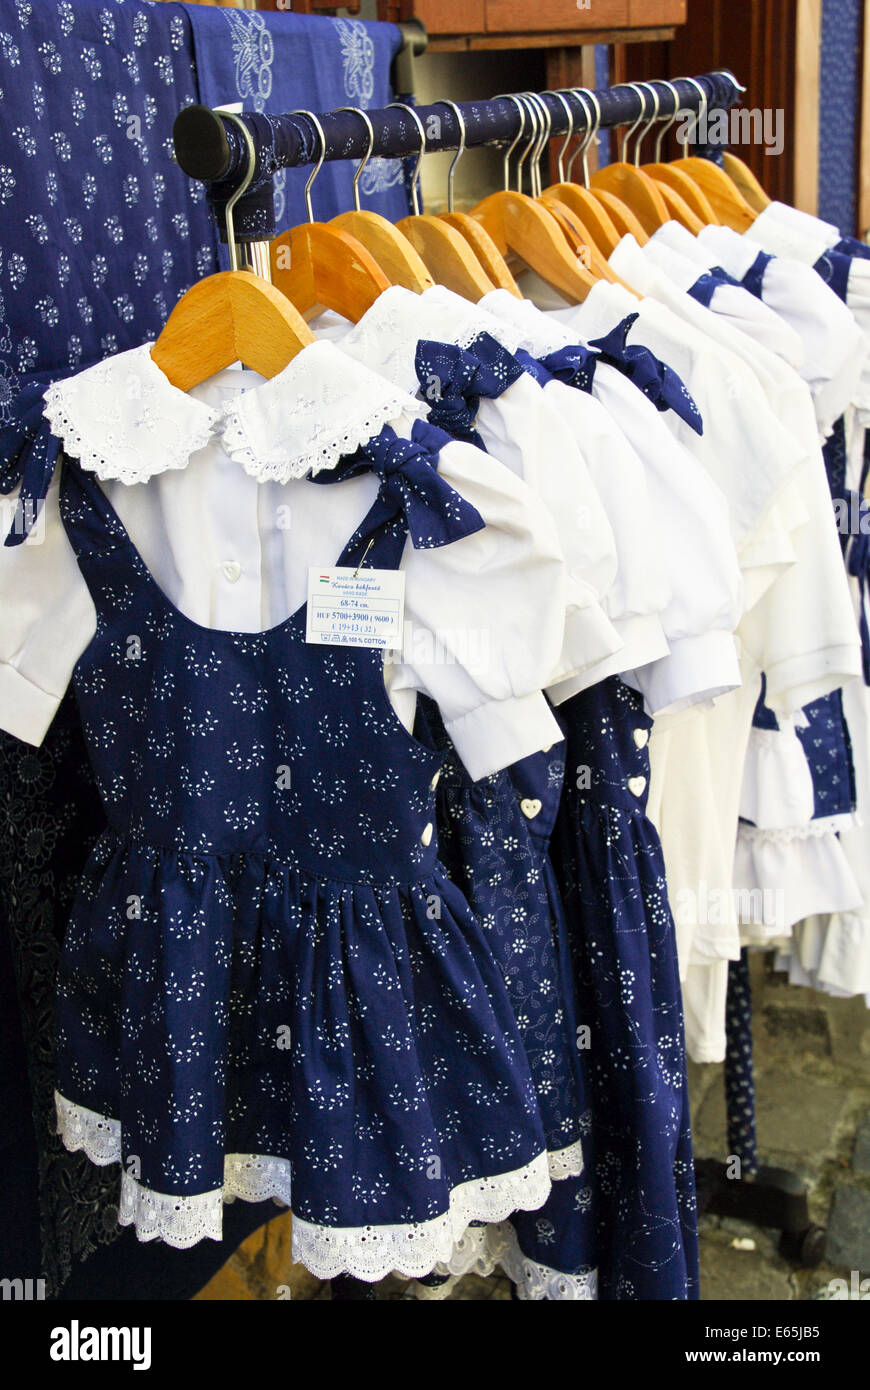 Merchandise of folk costumes in Szentedre, a riverside artistic town nearby Budapest, the capital of Hungary Stock Photo